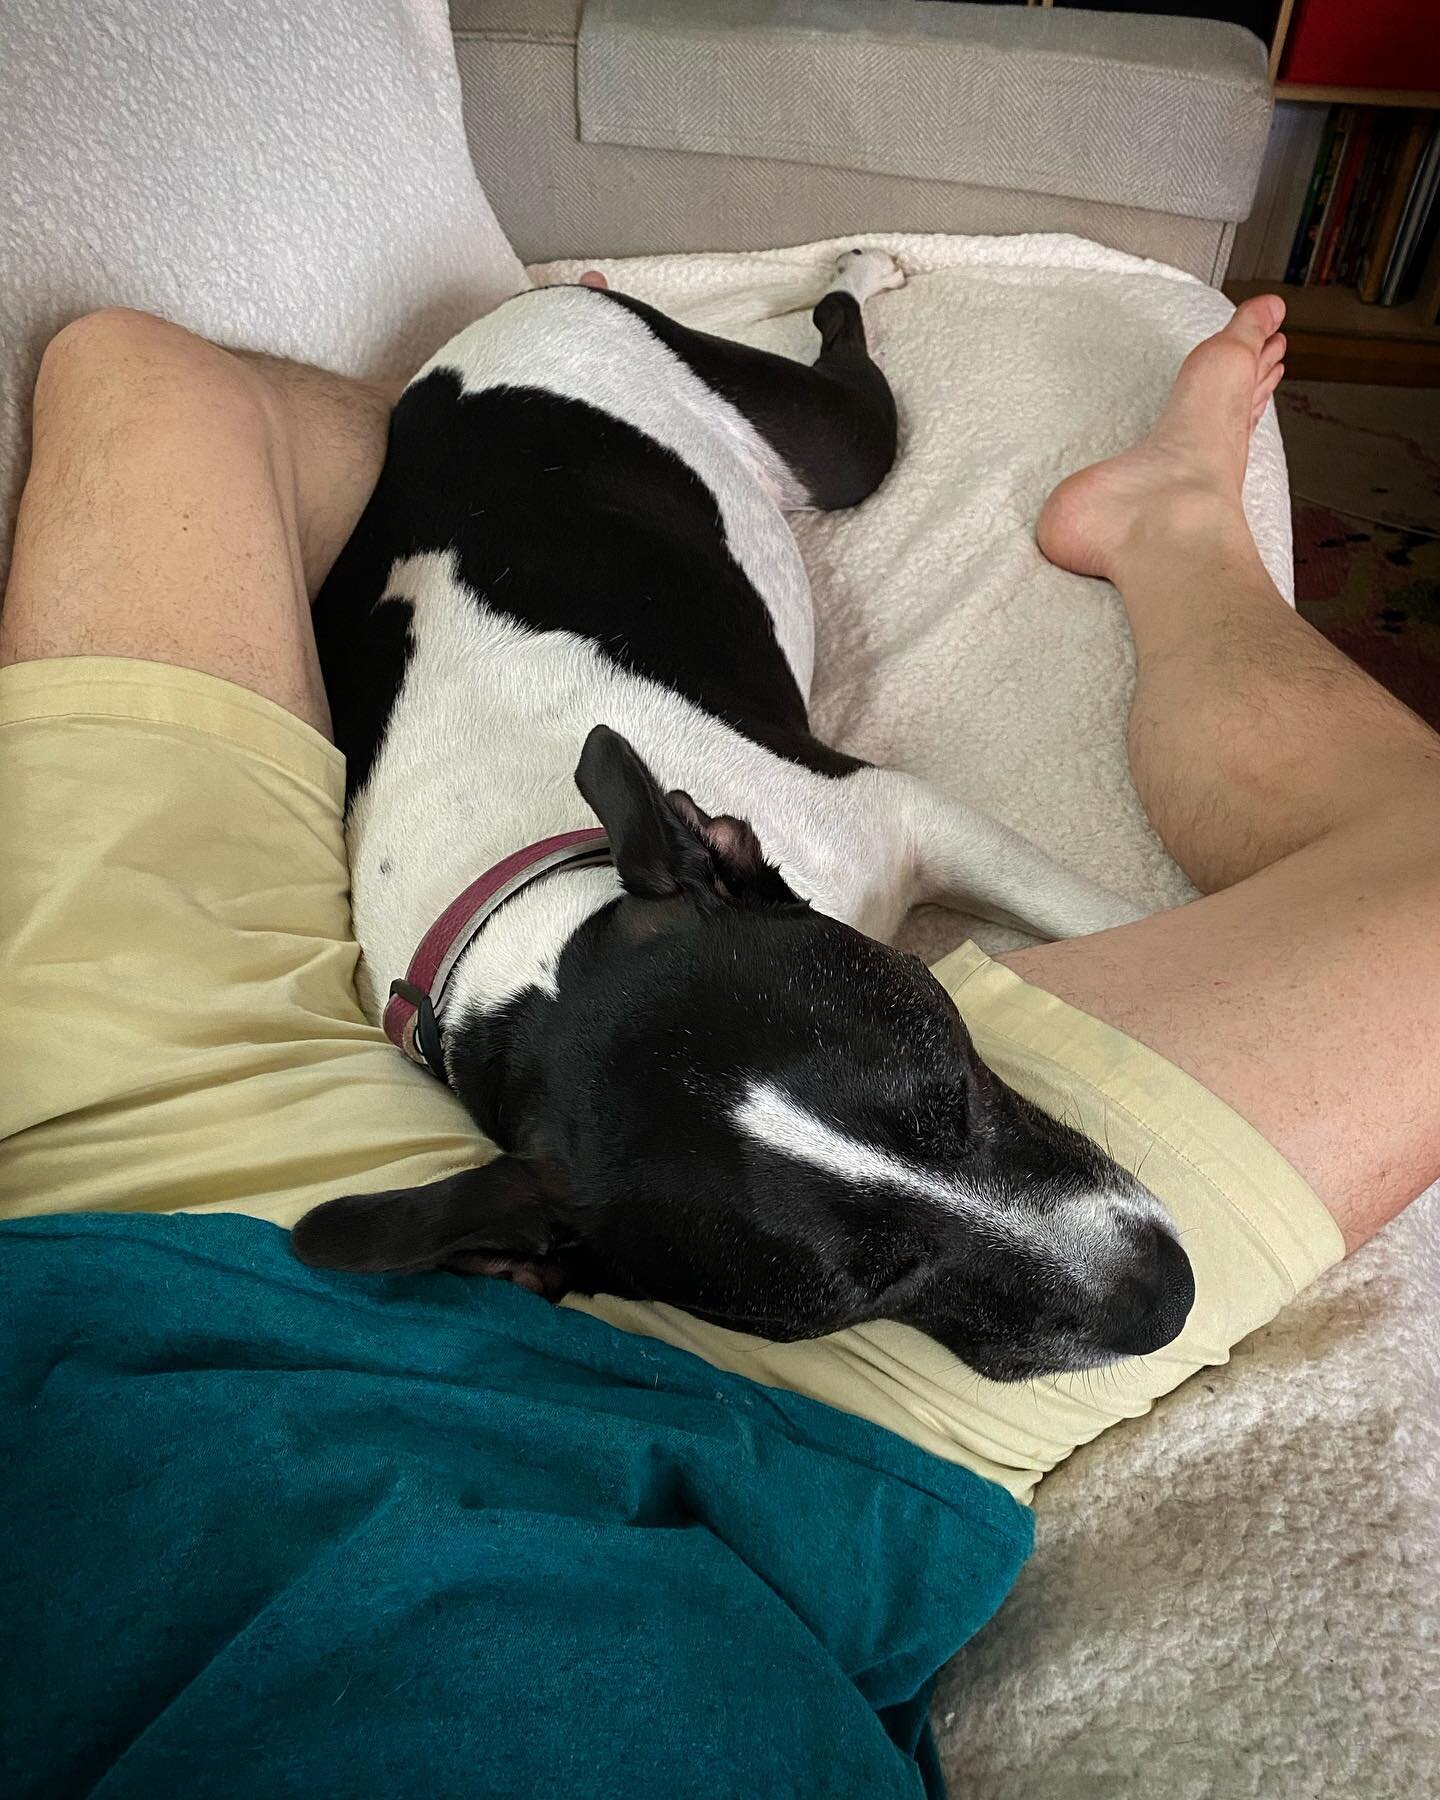 This one has been by my side all day&hellip;and now I am her pillow&hellip;.I do believe someone missed her daddy! Lol #aereed #ae3theagency #lifewithae #lwae #aeathome #maui #dontbullymybreed  #staffiesofinstagram #daddysgirl😘